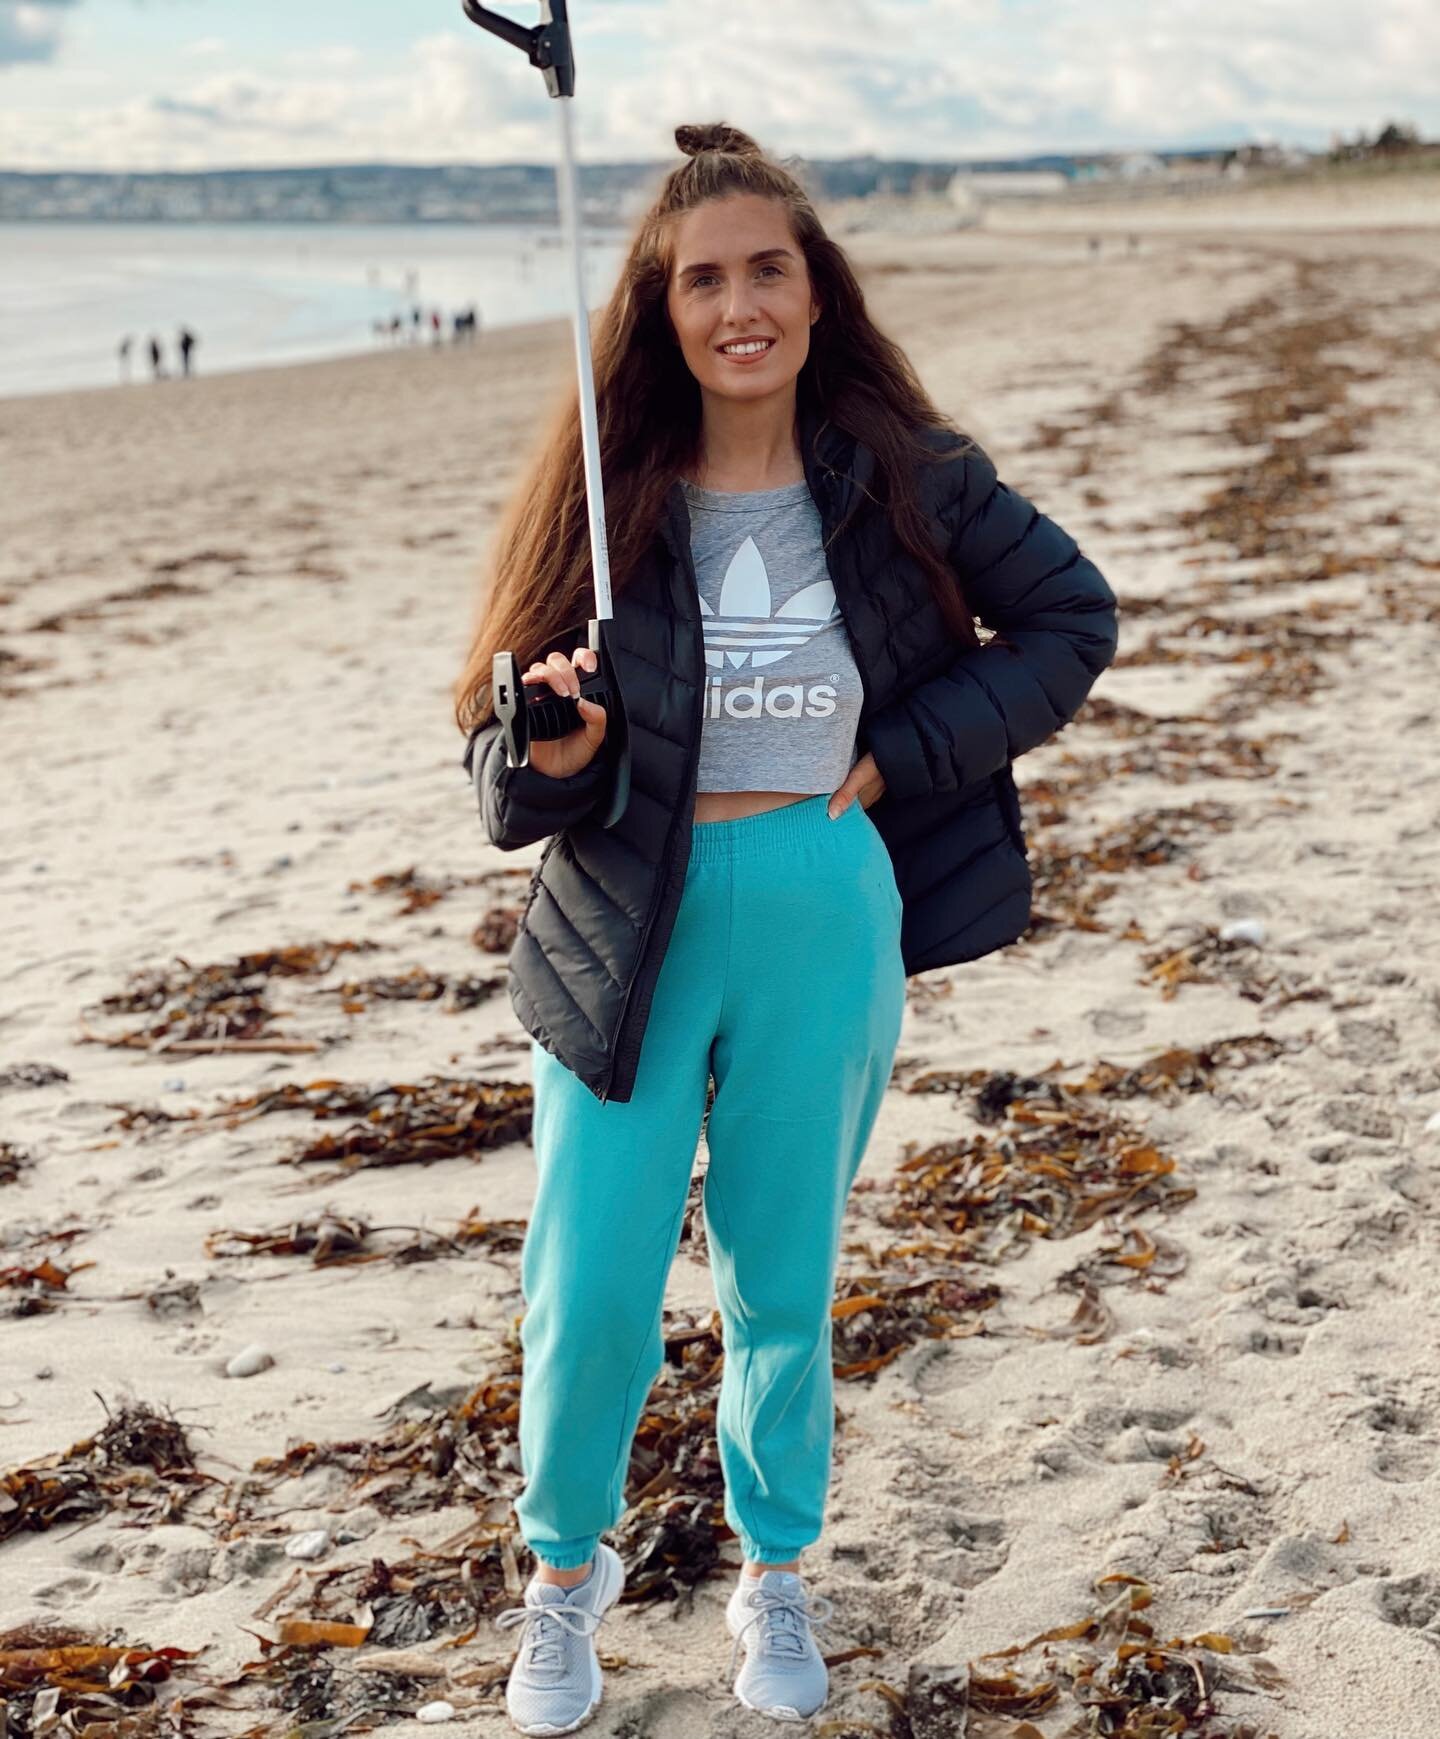 Finally completed my little beach cleaning goal yesterday, the perfect way to start the new year!

It has been an absolute labour of love trying to get 30 beach cleans done during the worst weather season, but also bloody lovely to have done lots of 